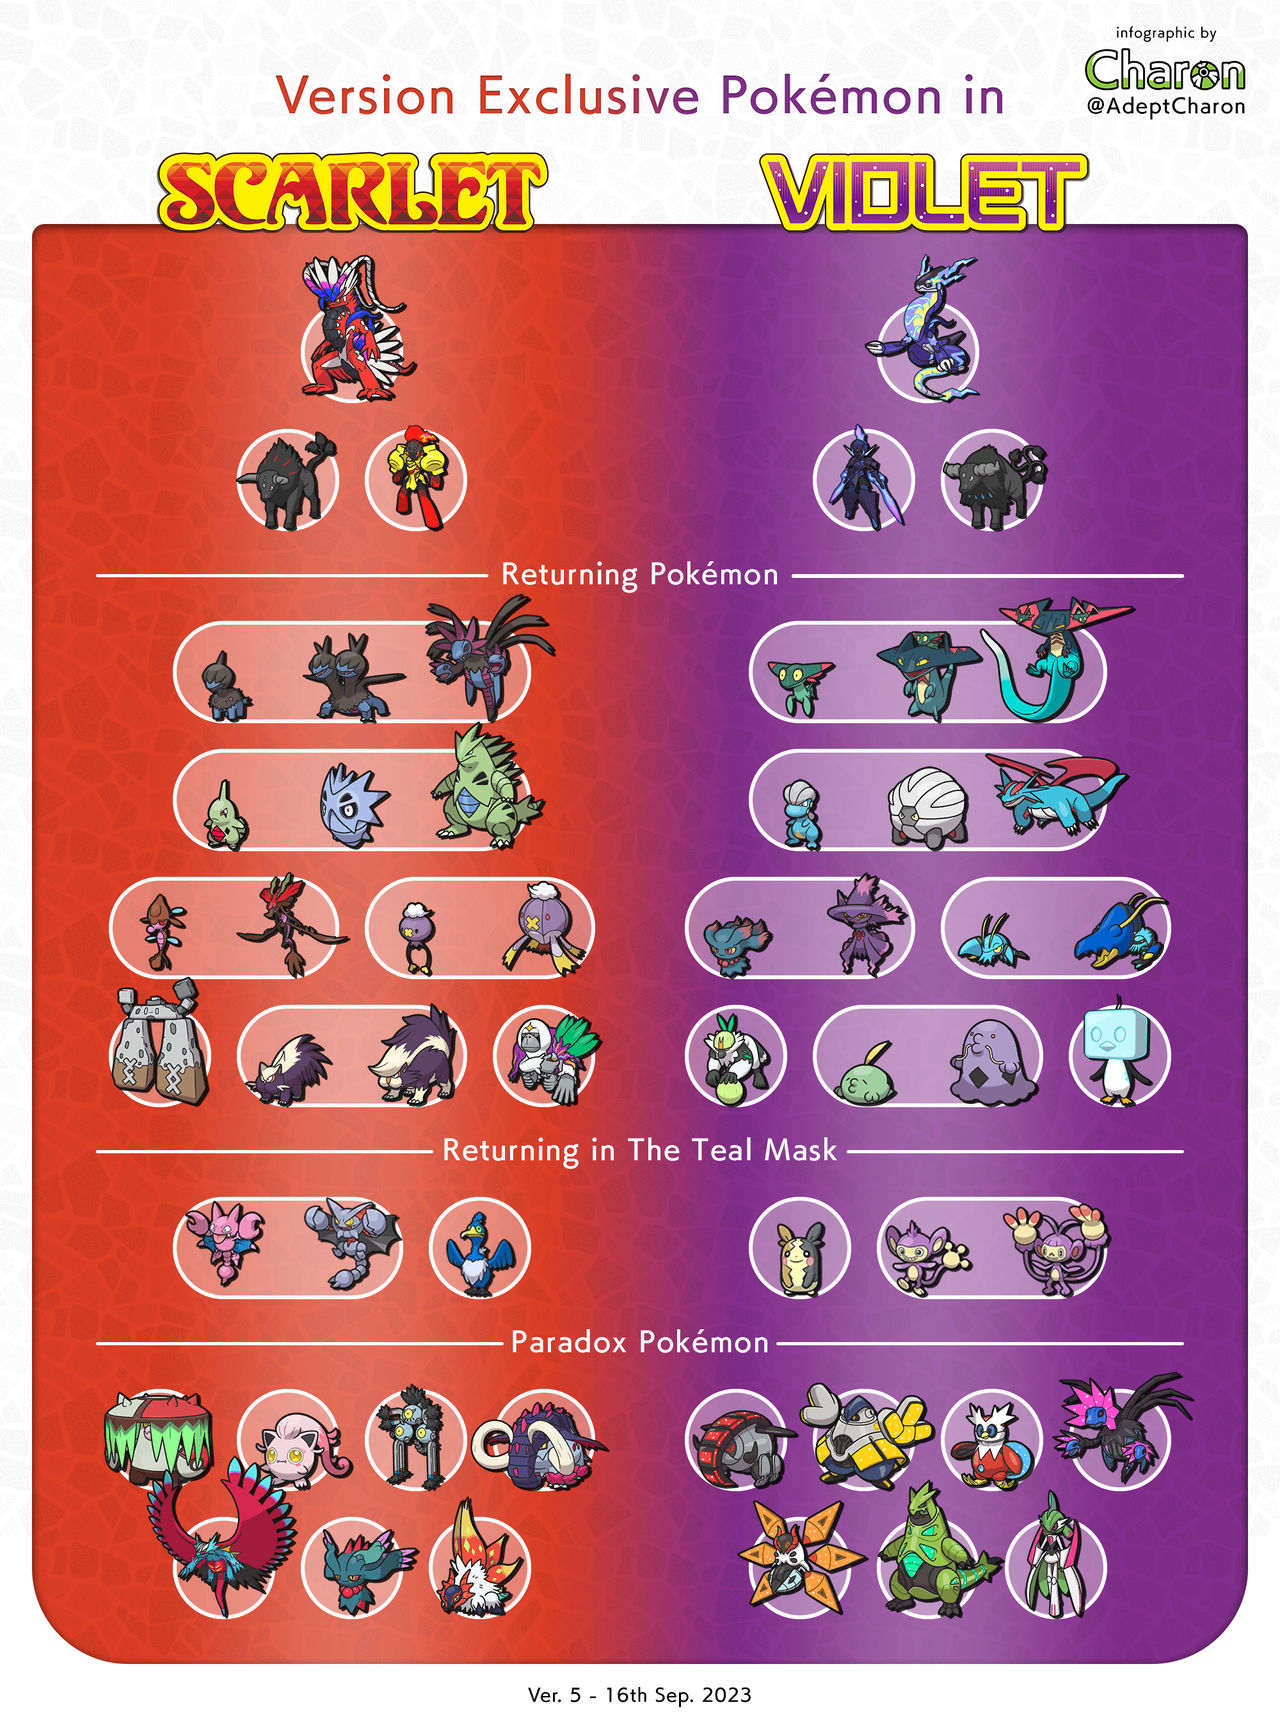 Pokémon Scarlet and Violet: All 400 Pokémon and exclusives